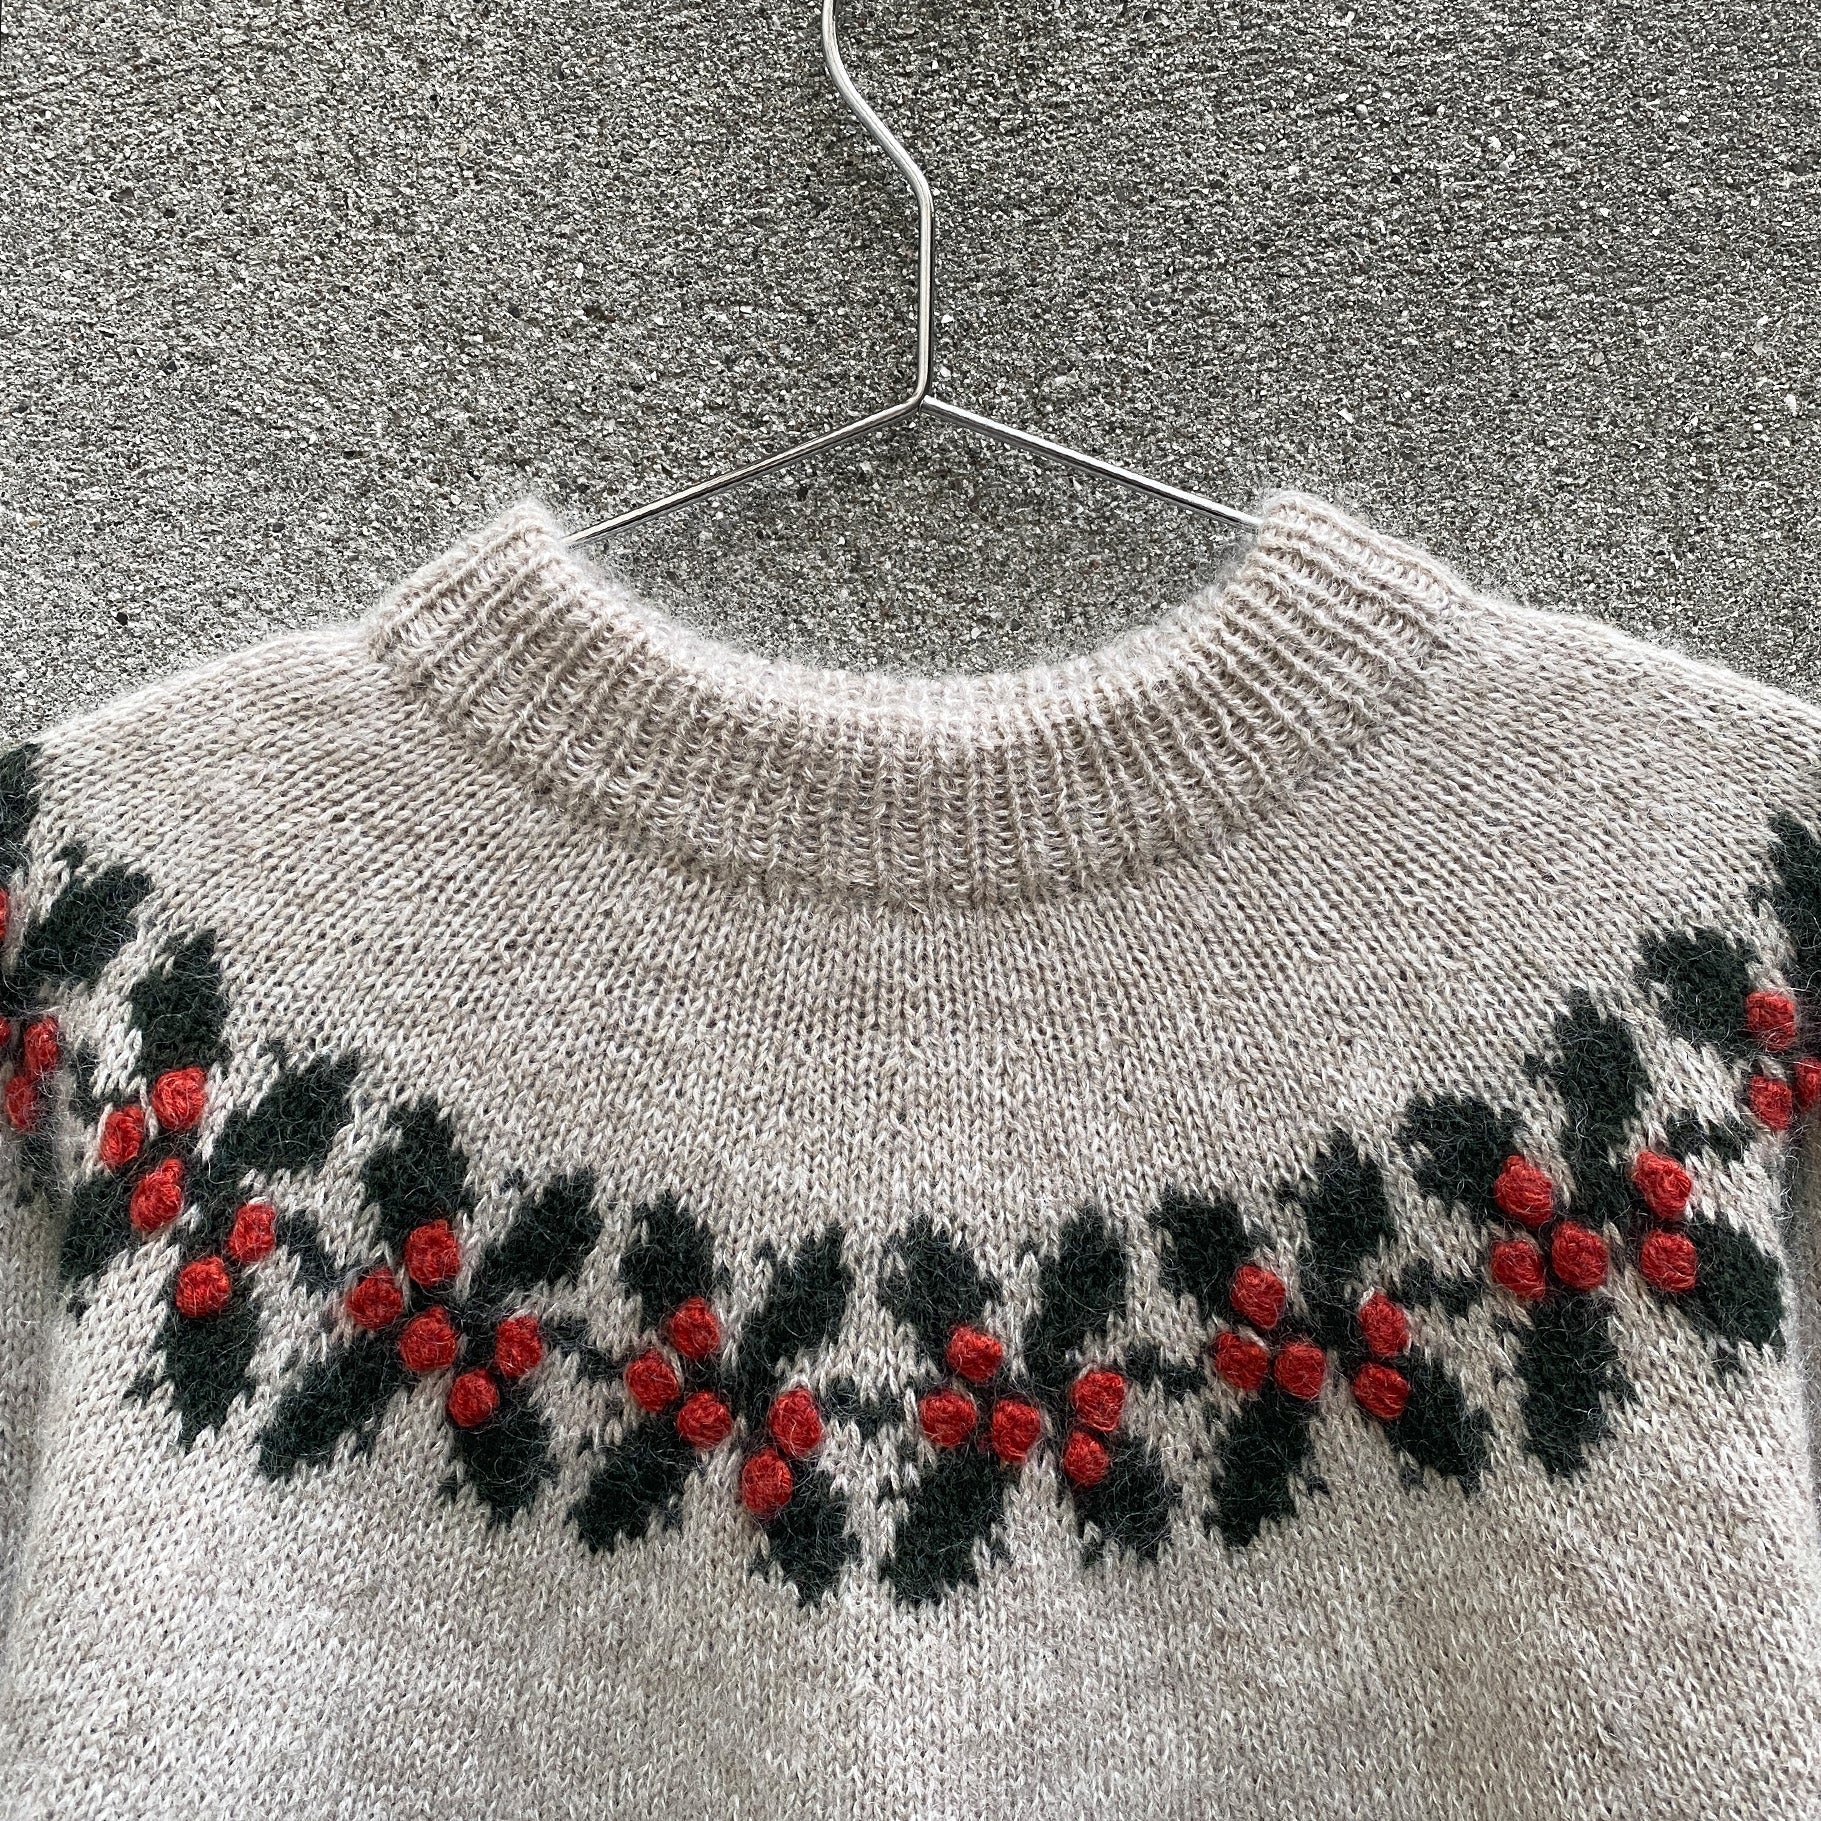 Holly Sweater